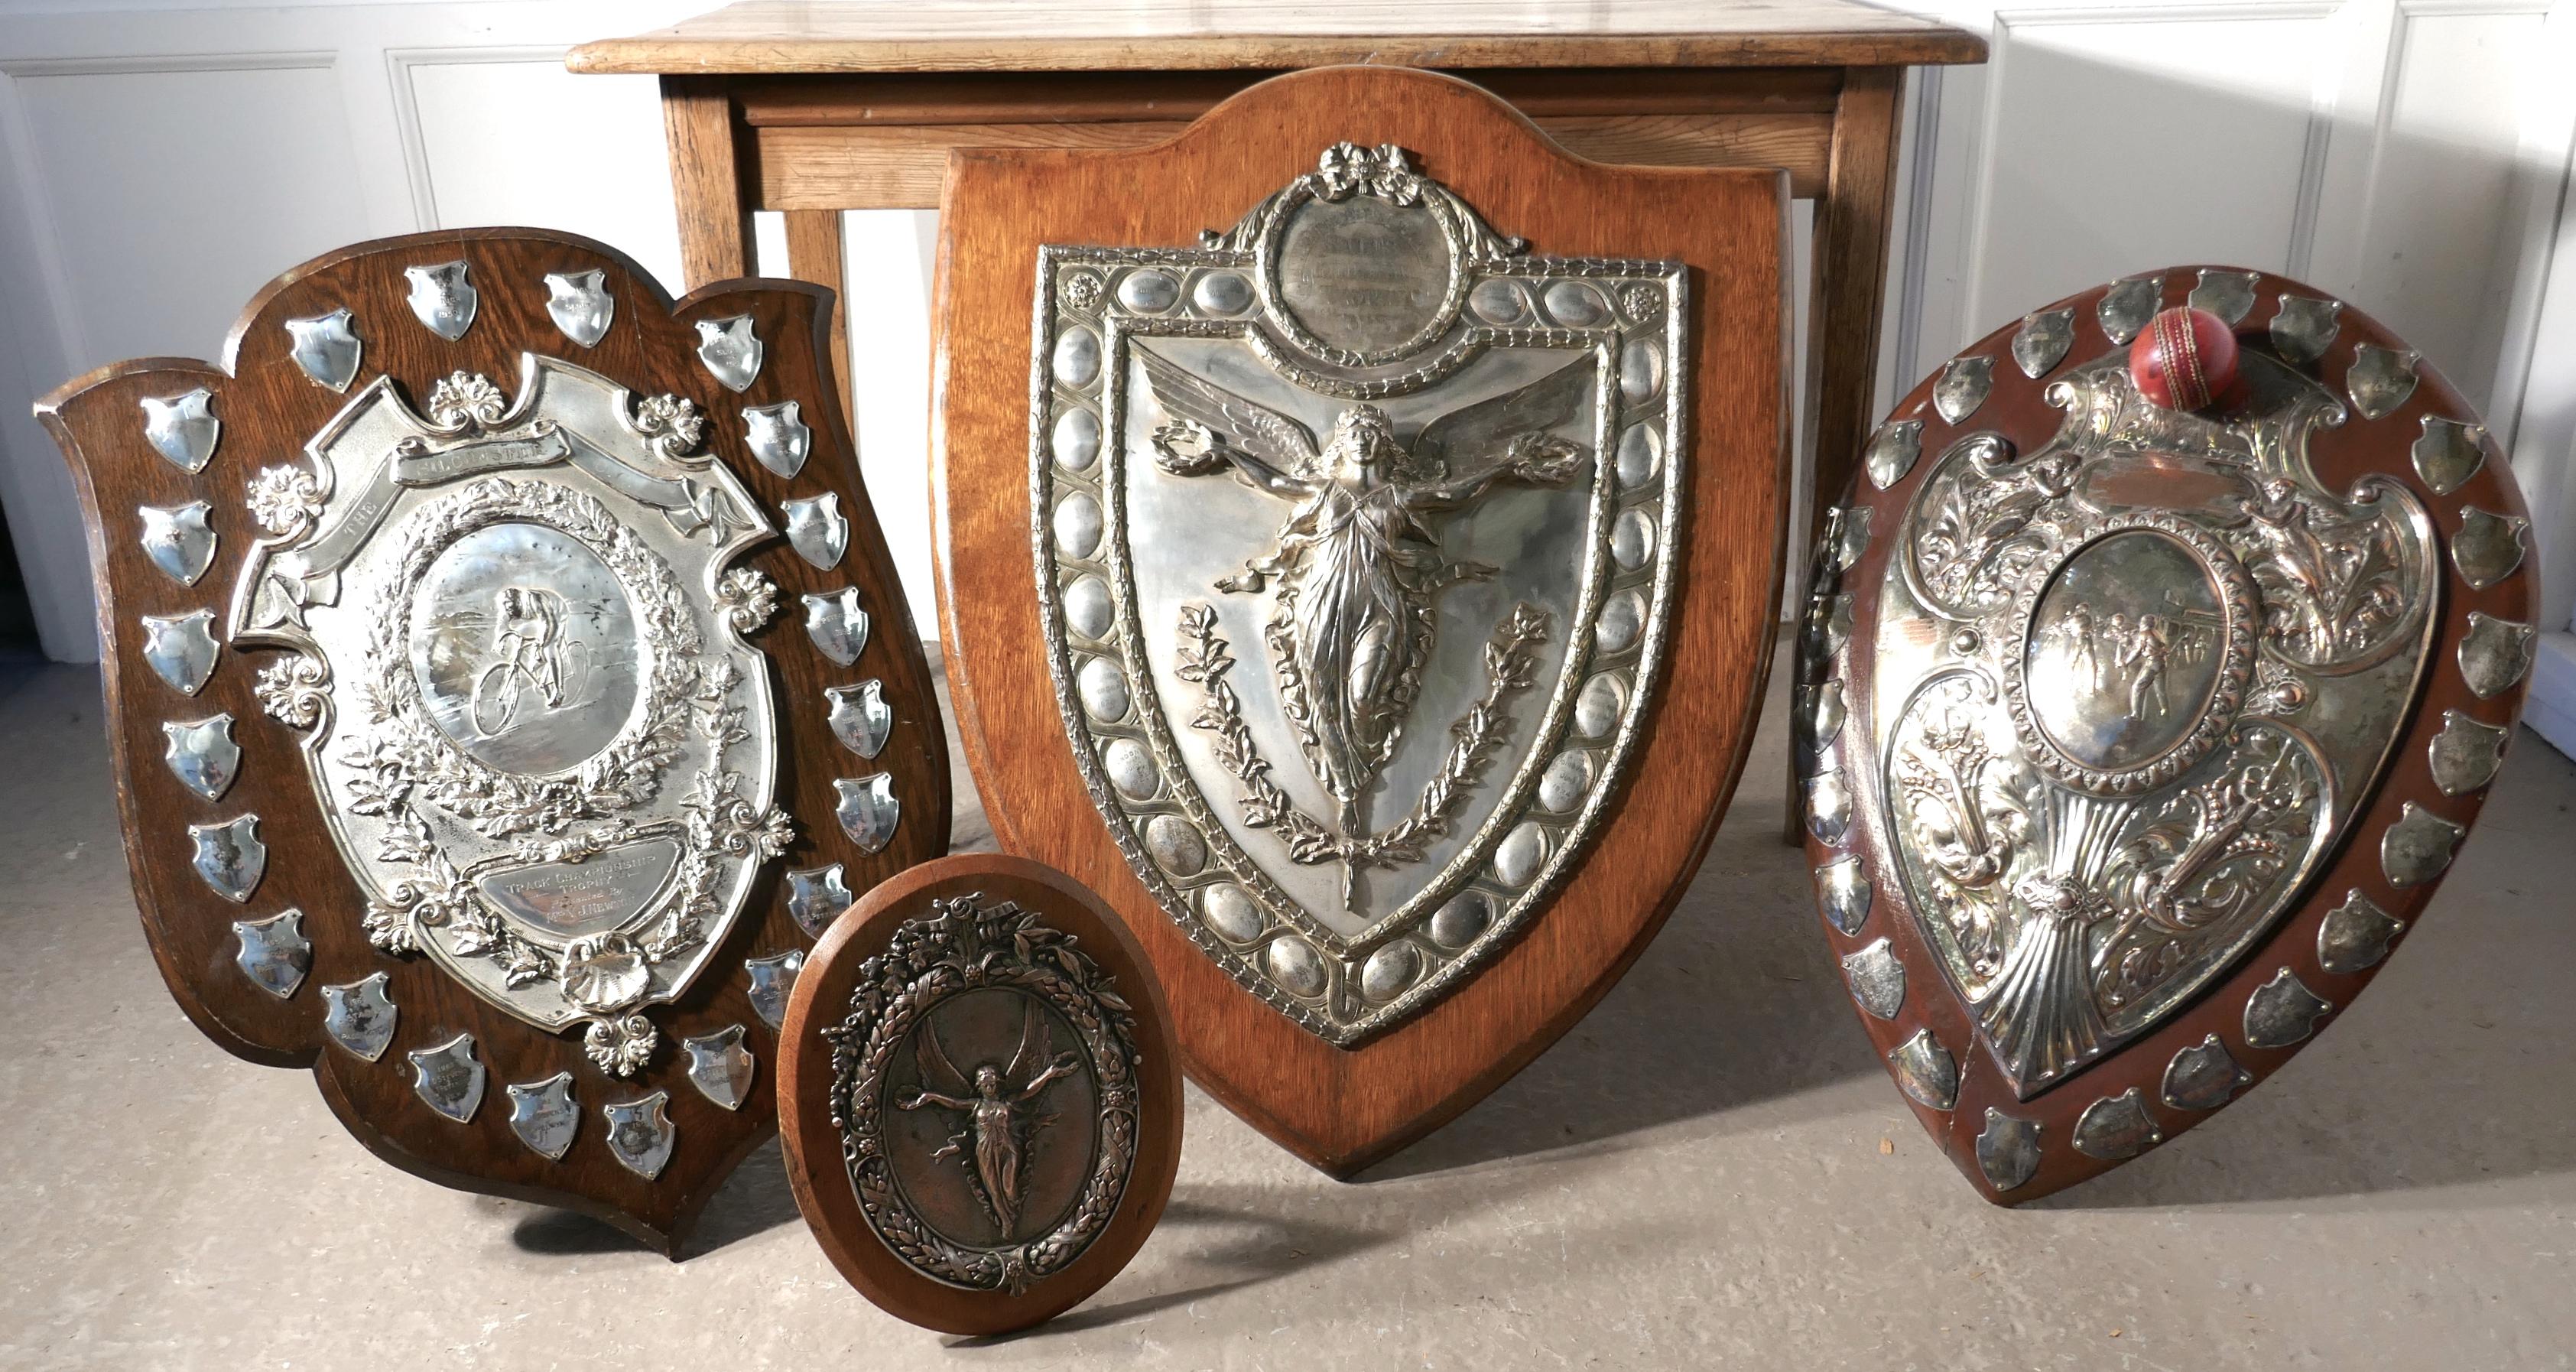 Large Arts & Crafts shield trophy with Nike the goddess of victory 

The is a very impressive Arts & Crafts piece, the golden oak shield has a large silver plated mount, in the centre there Nike the winged Greek goddess of victory celebrating with